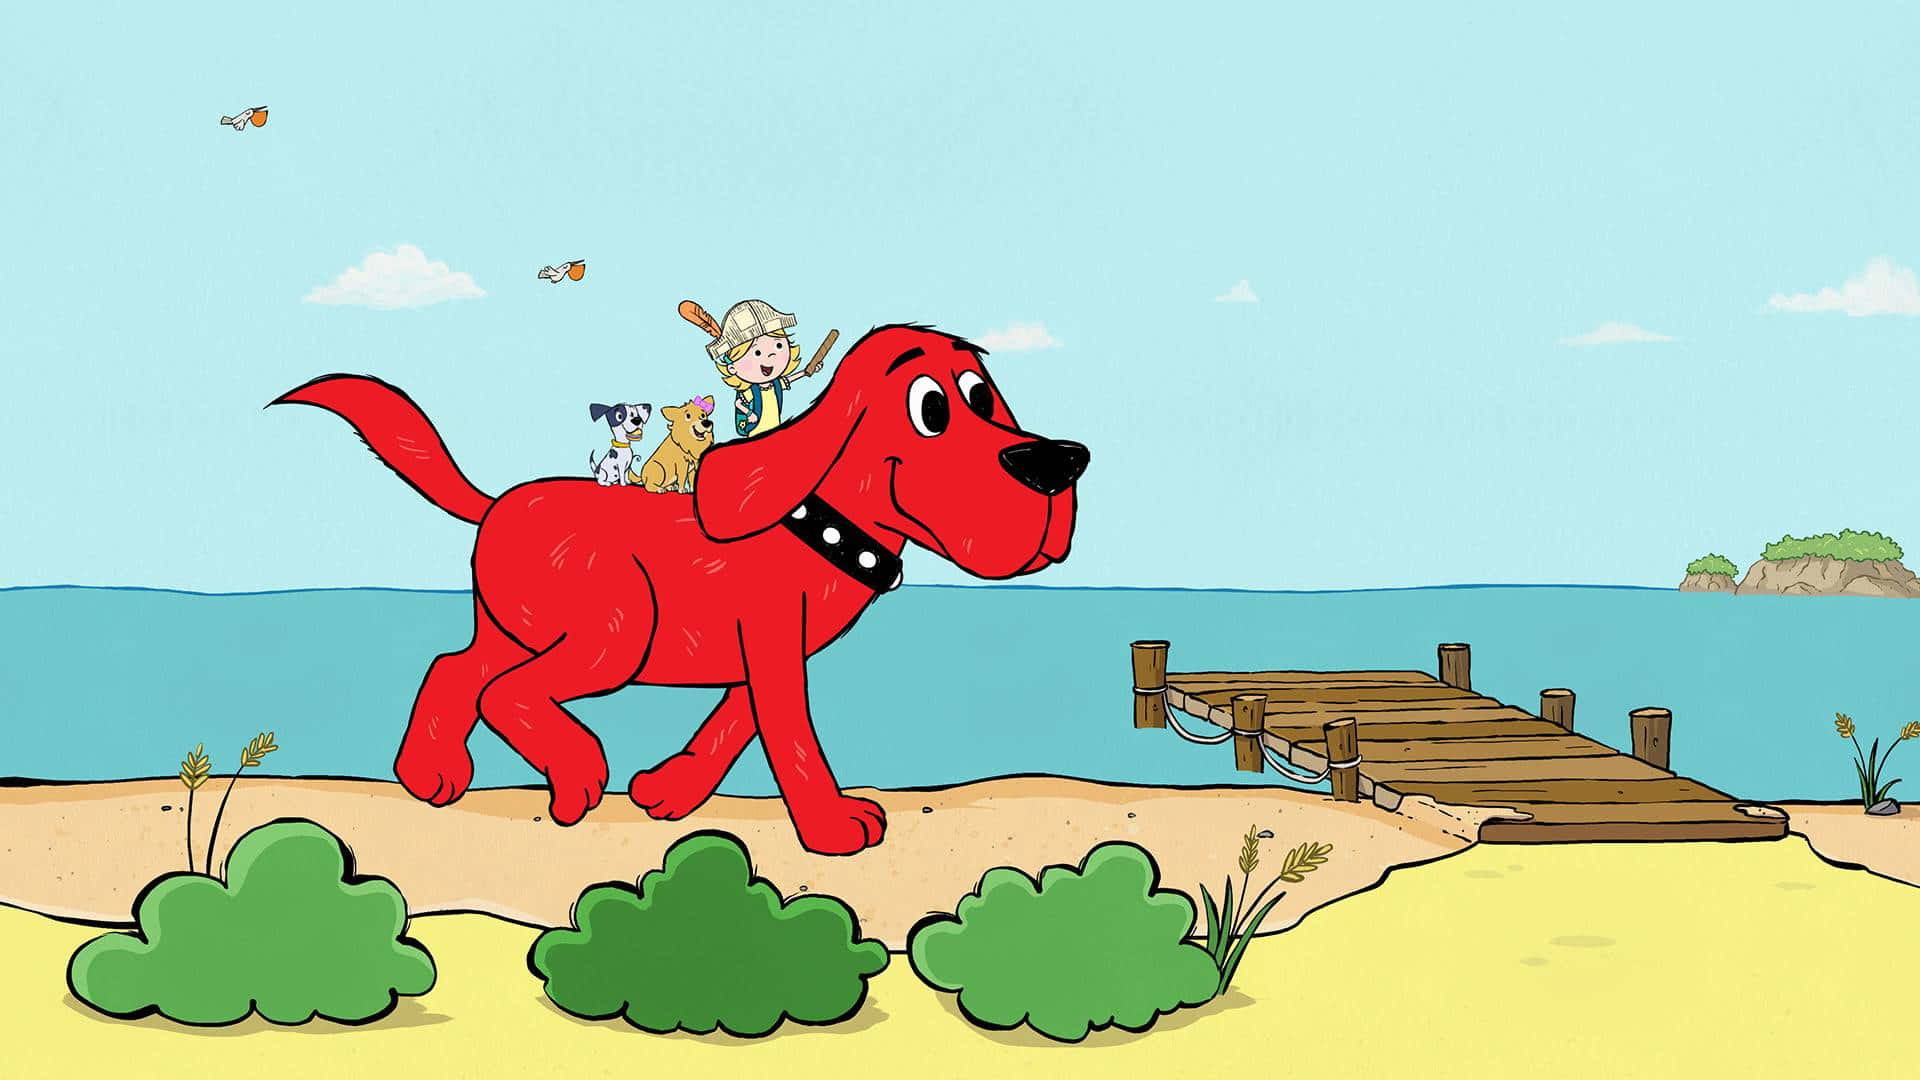 Our beloved Clifford The Big Red Dog is always here to spread joy and friendship!